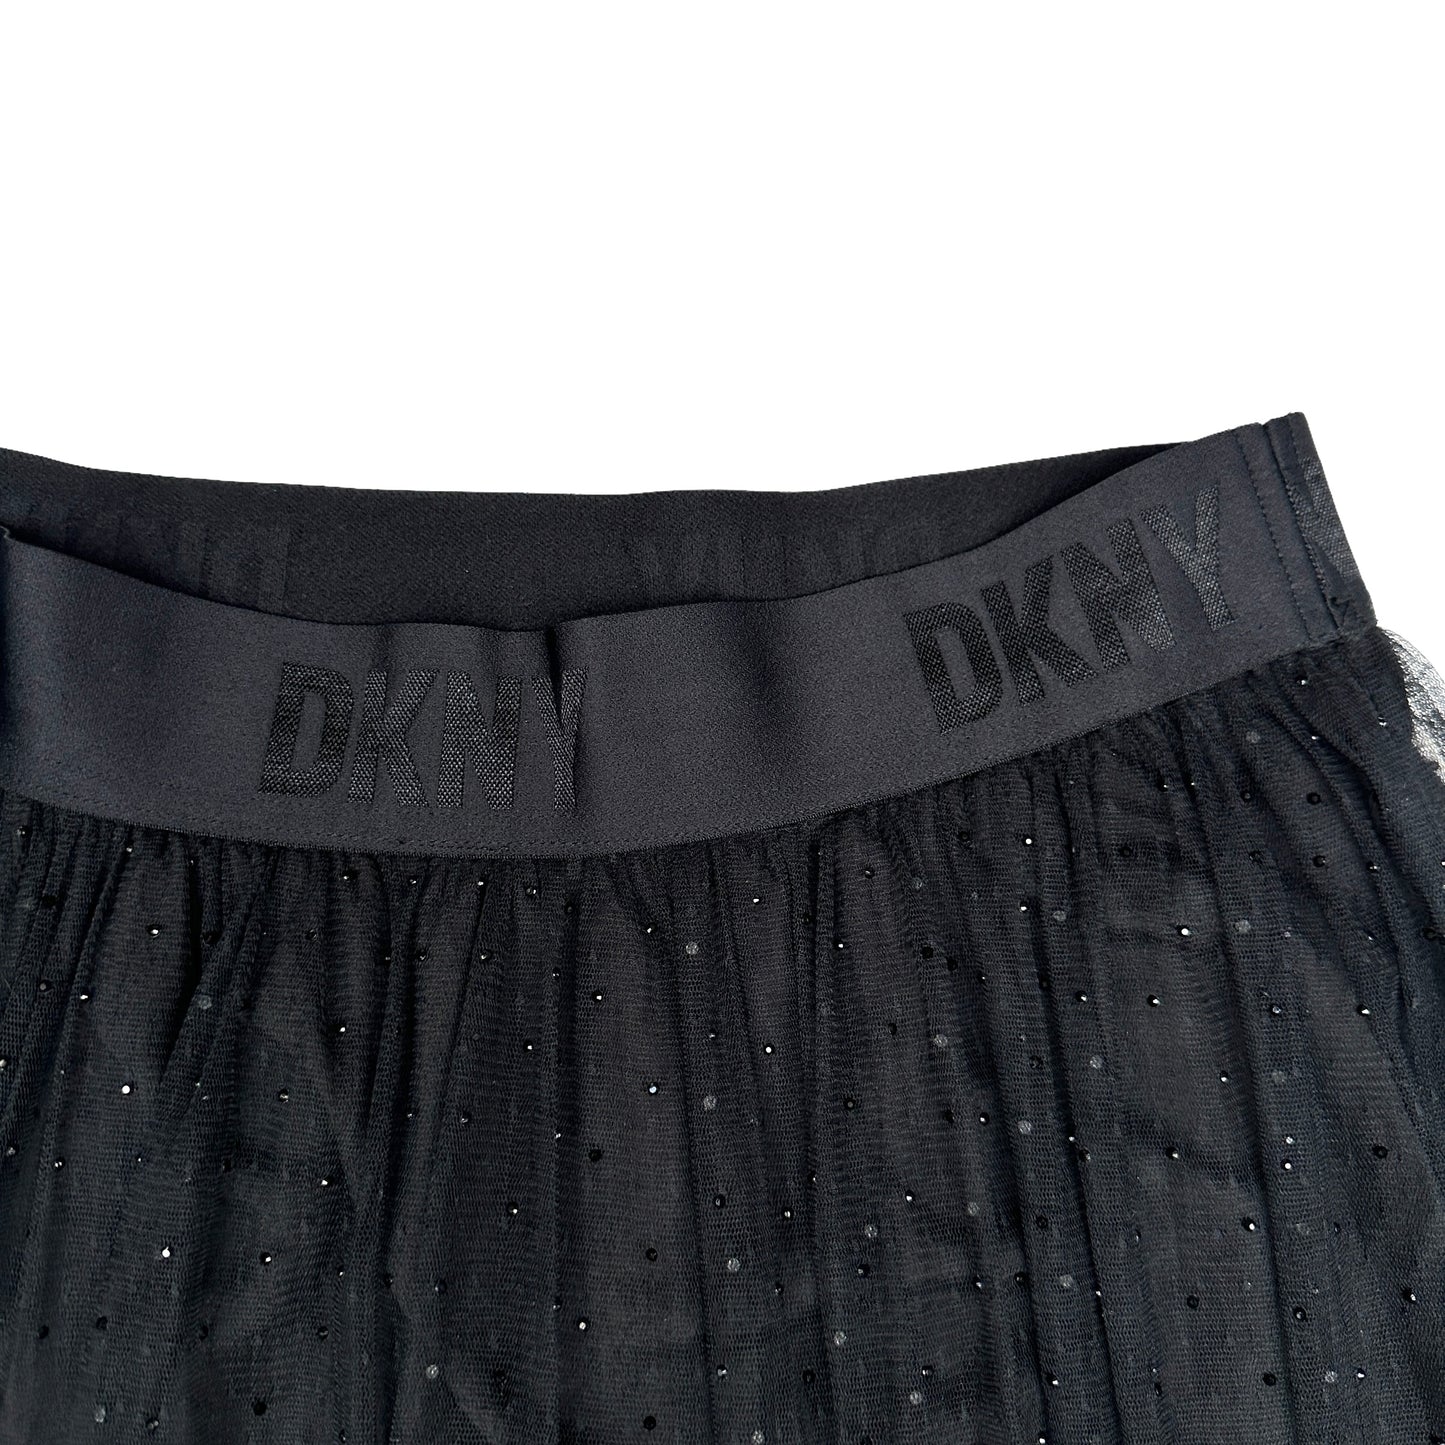 Black Tulle Skirt w/Crystals - M